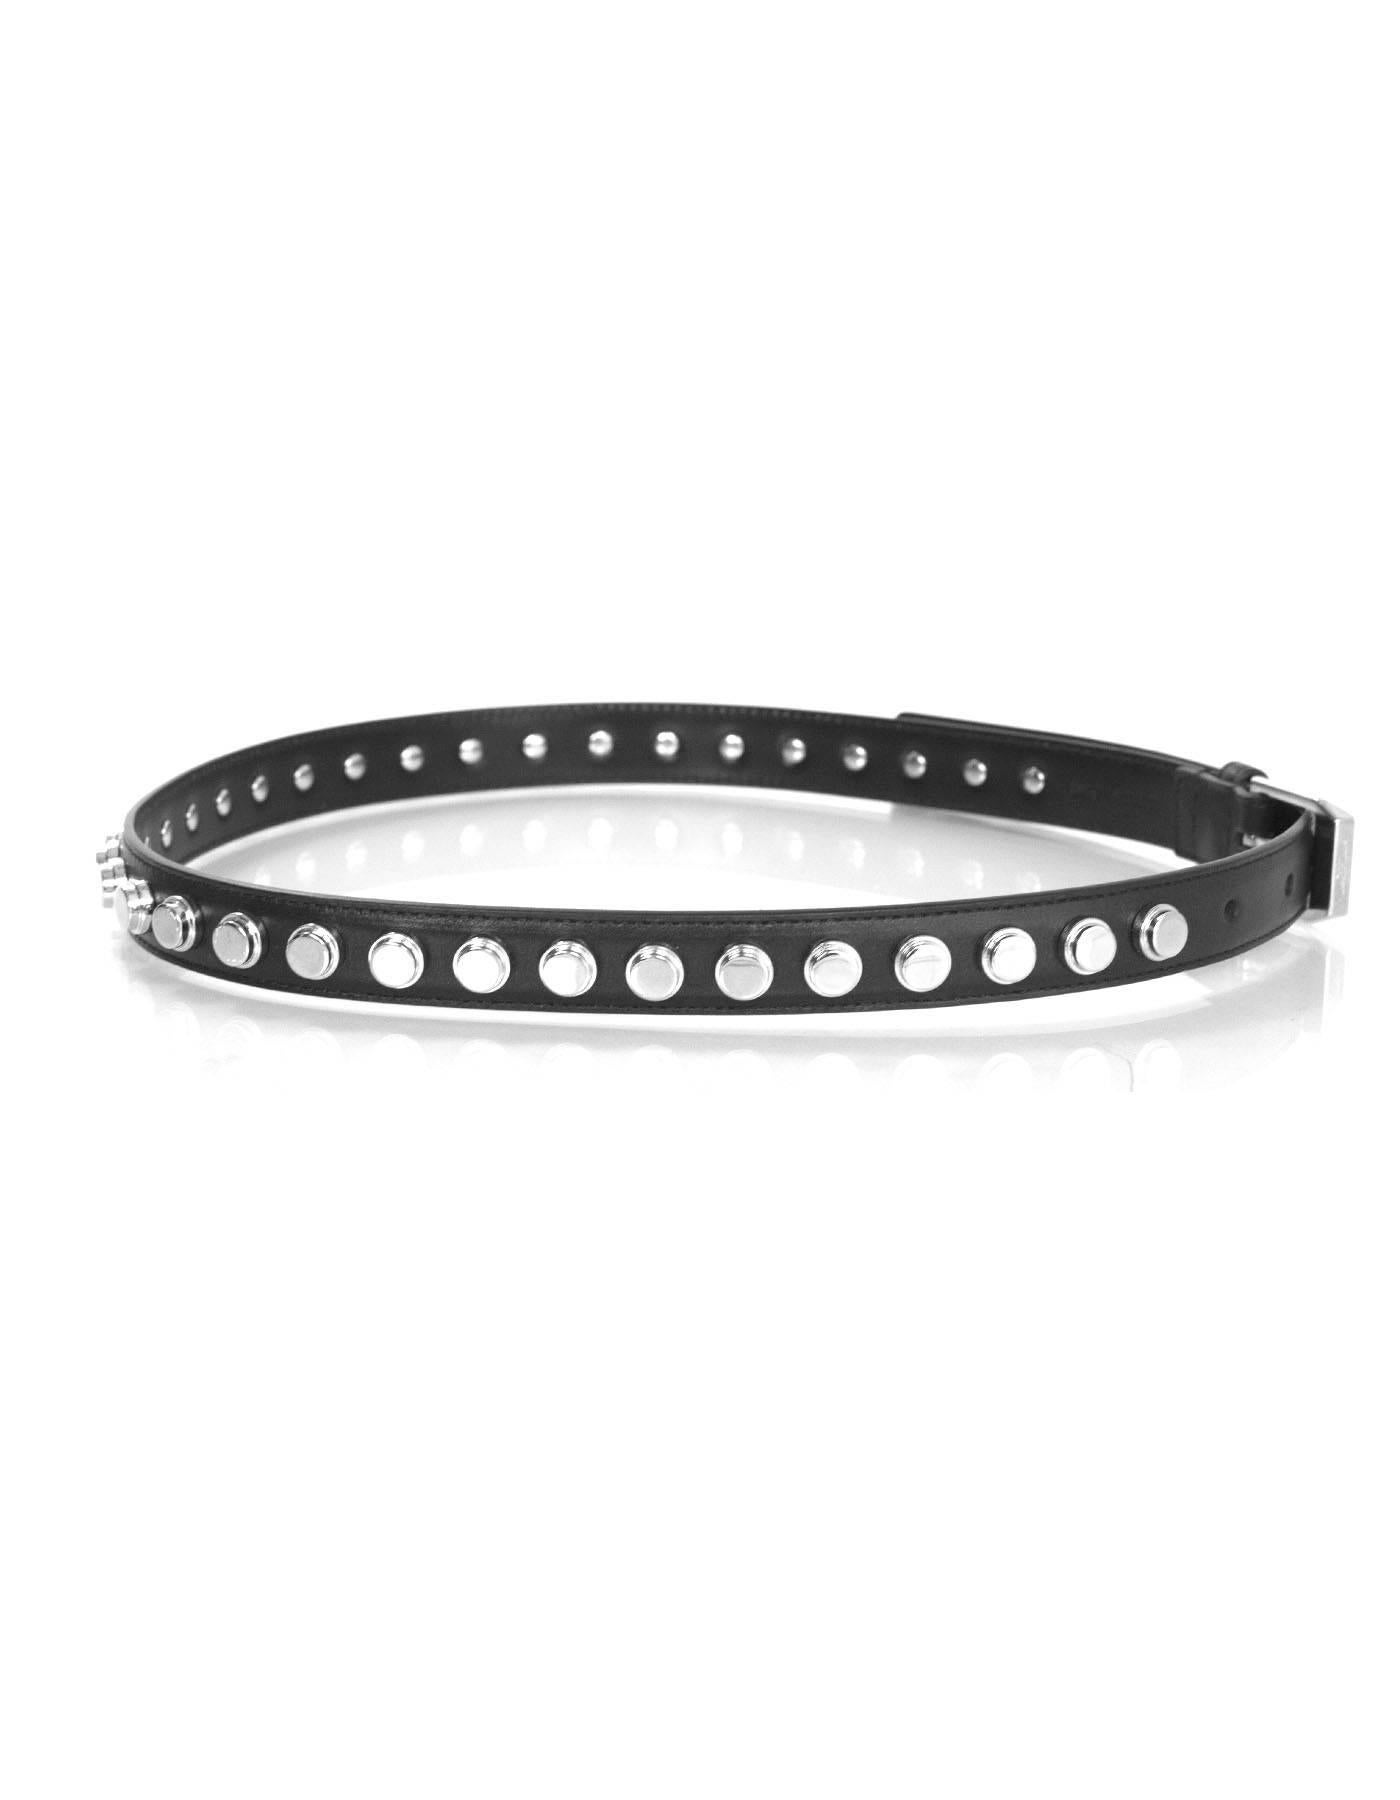 Saint Laurent Black & Silvertone Studded Belt 

Made In: Italy
Color: Black
Hardware: Silvertone
Materials: Leather and metal
Closure/Opening: Buckle and notch closure
Stamp: 314552.212956.70.28
Retail Price: $895 + tax
Overall Condition: